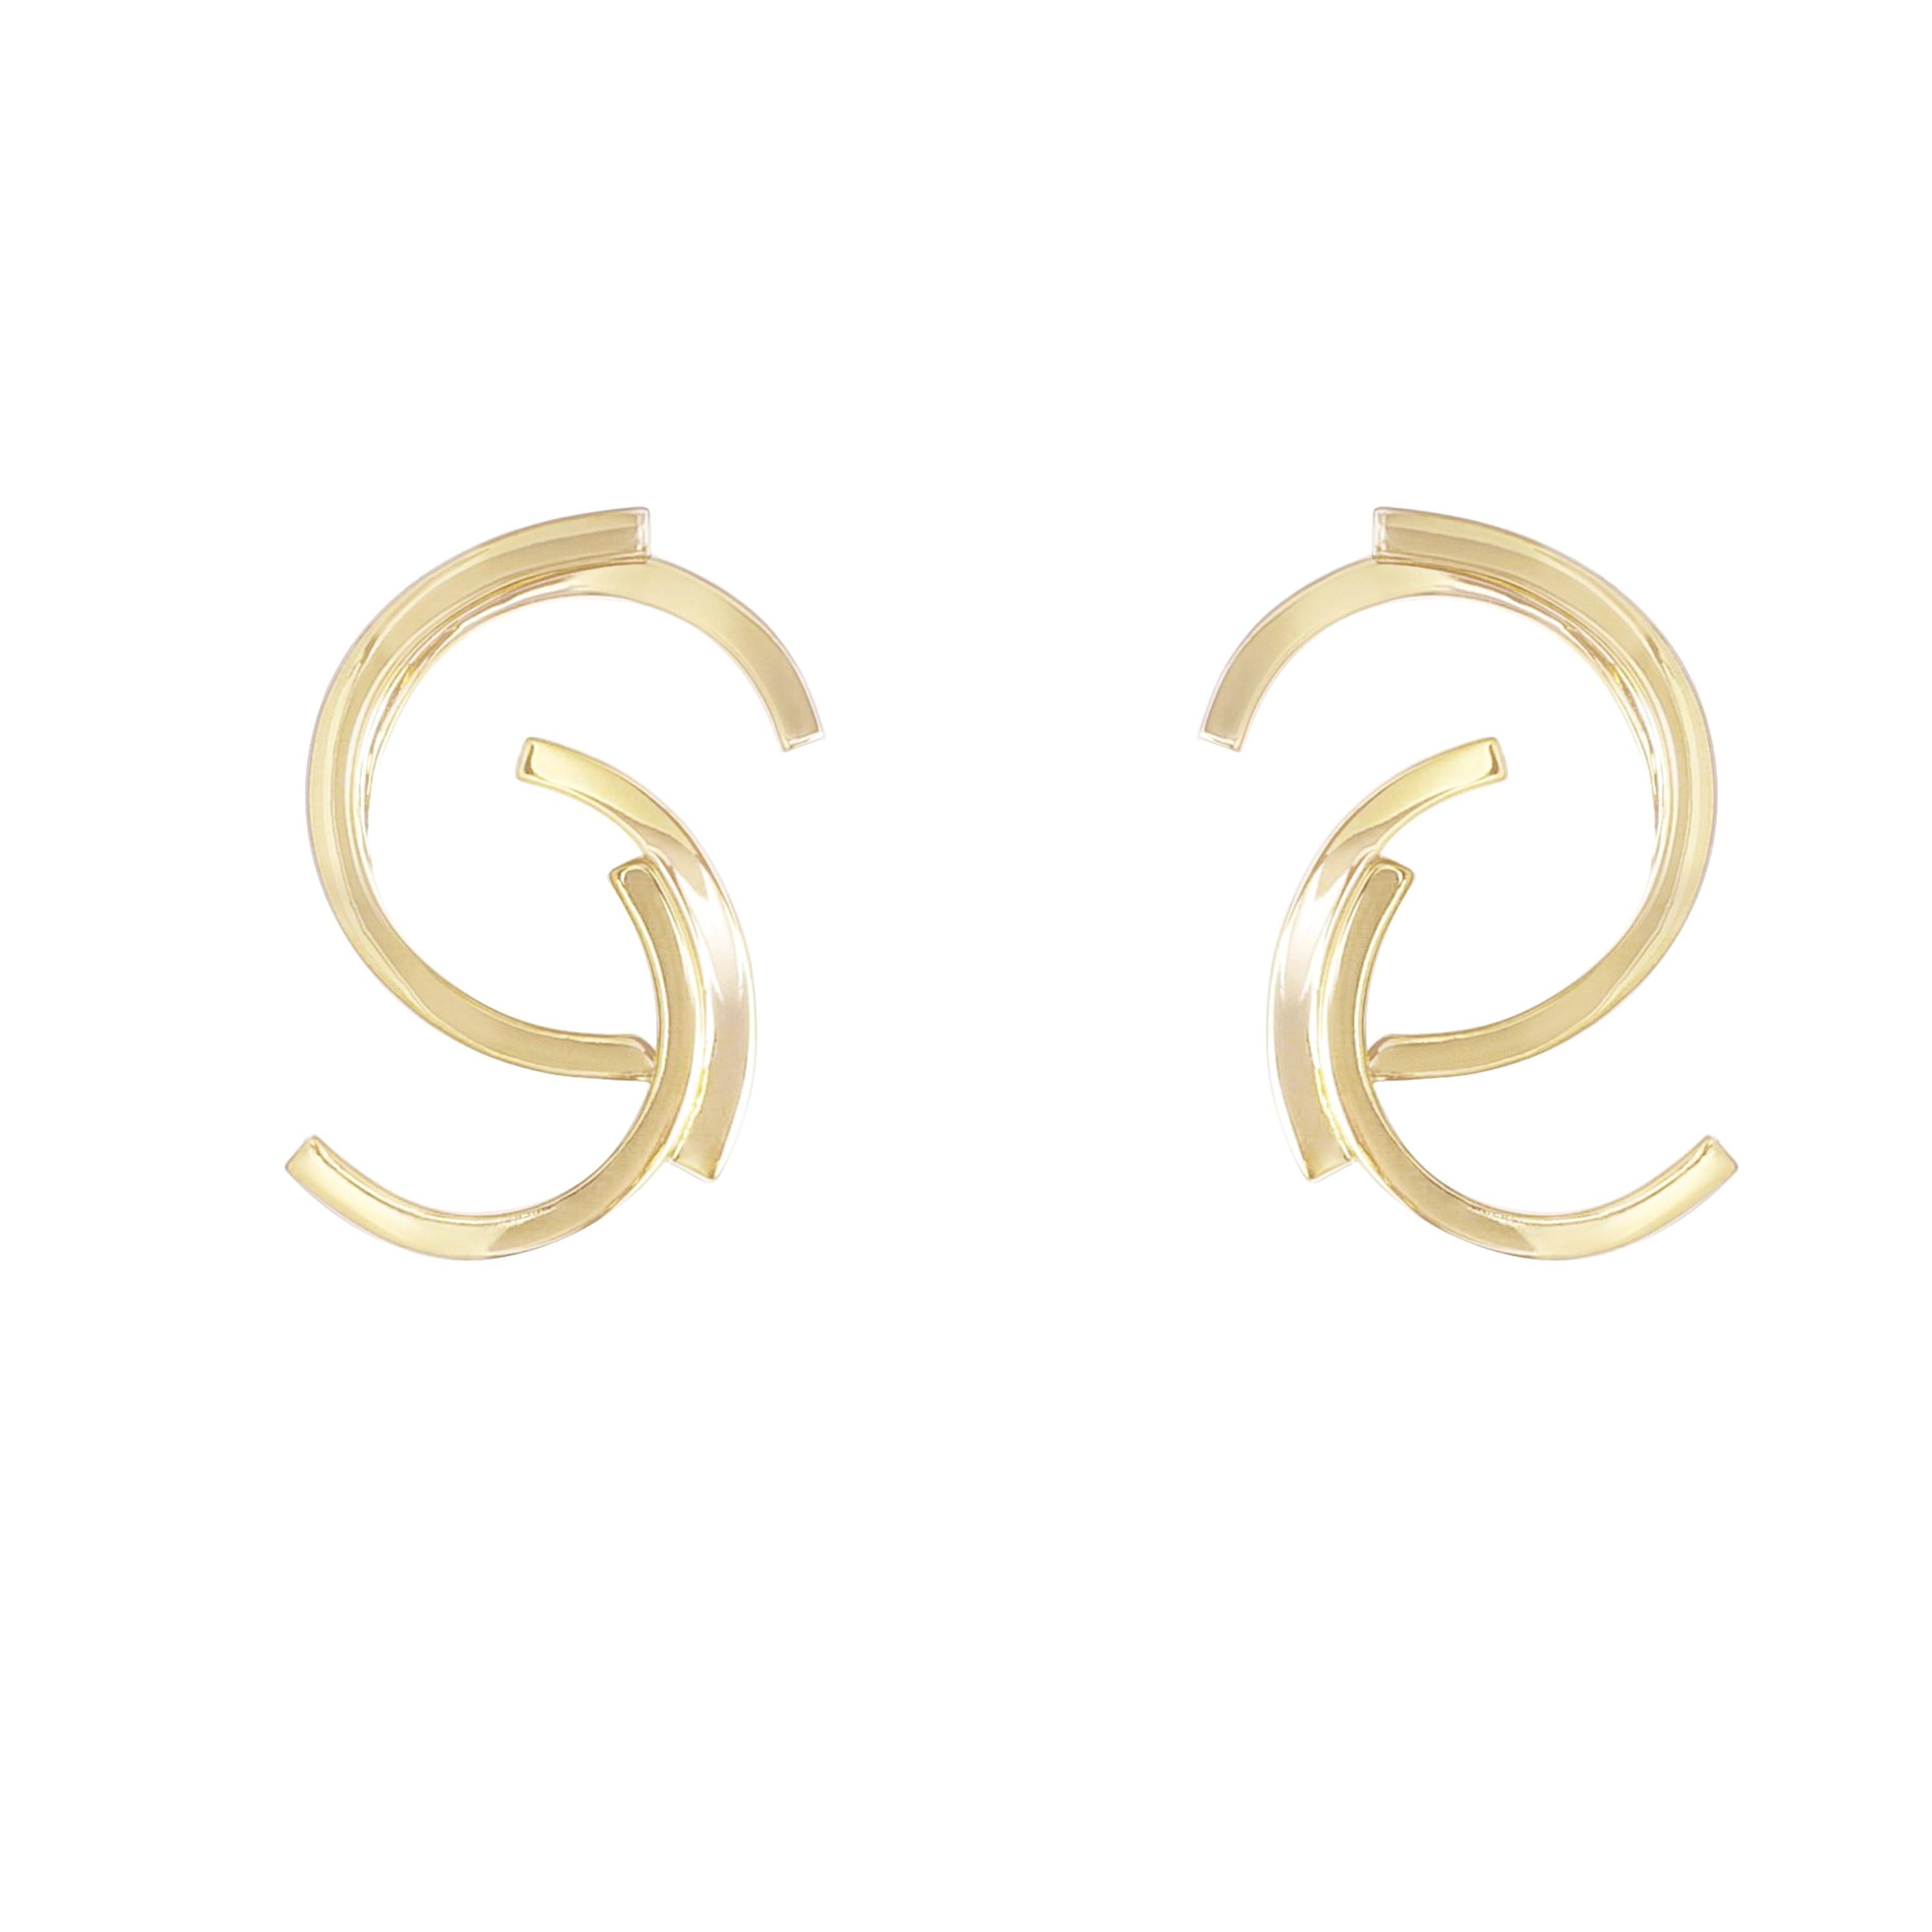 Sibylle von Munster Double Arc Earrings in 18 Karat Yellow and White Gold For Sale